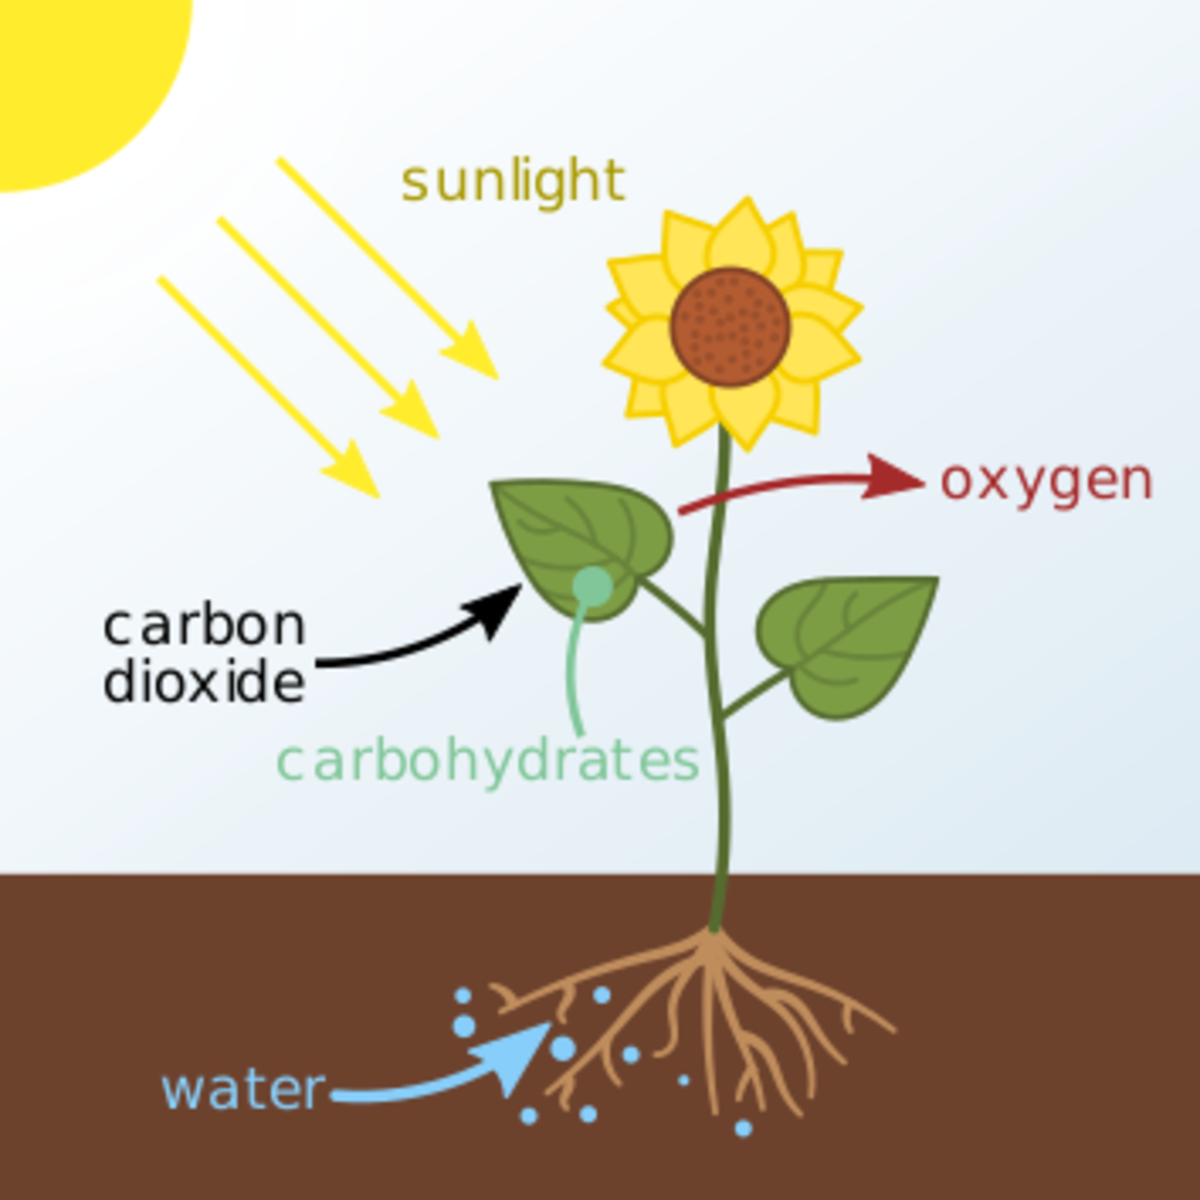 what is the role of water in photosynthesis explain